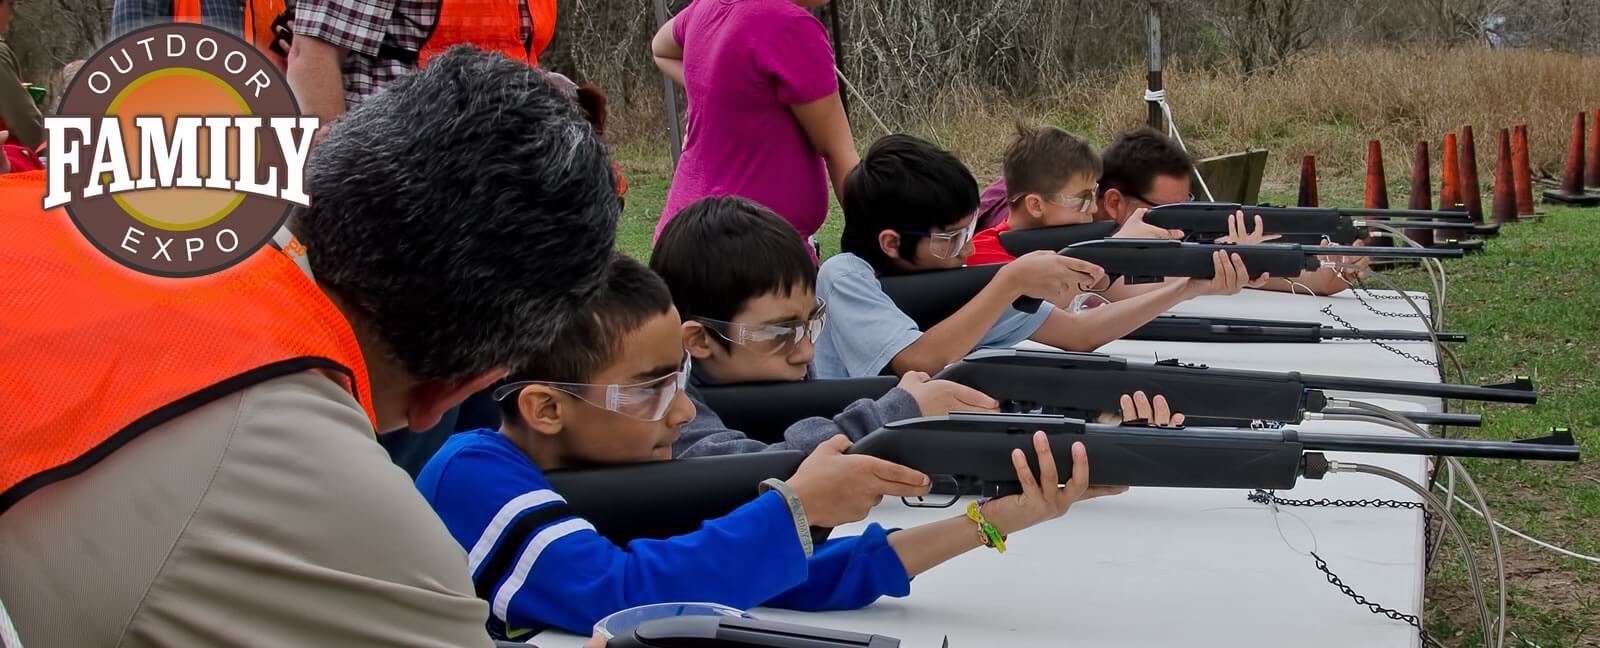 Pellet Shooting at the Family Outdoor Expo